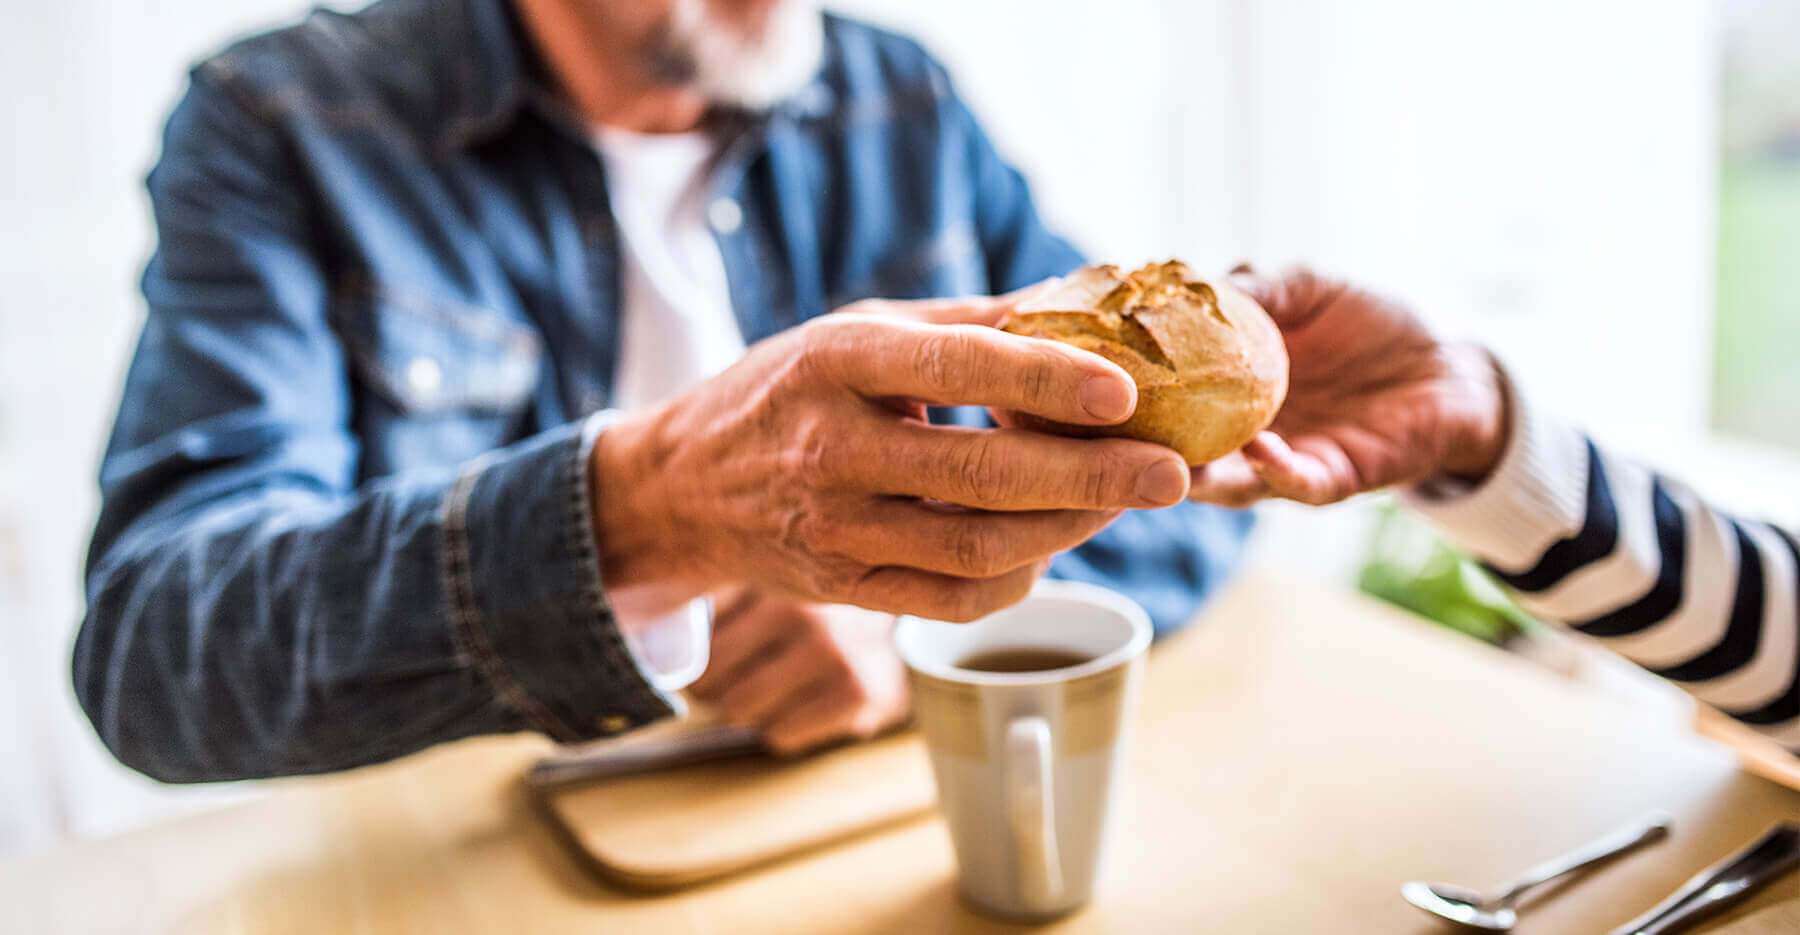 A man handing a dinner roll to another person